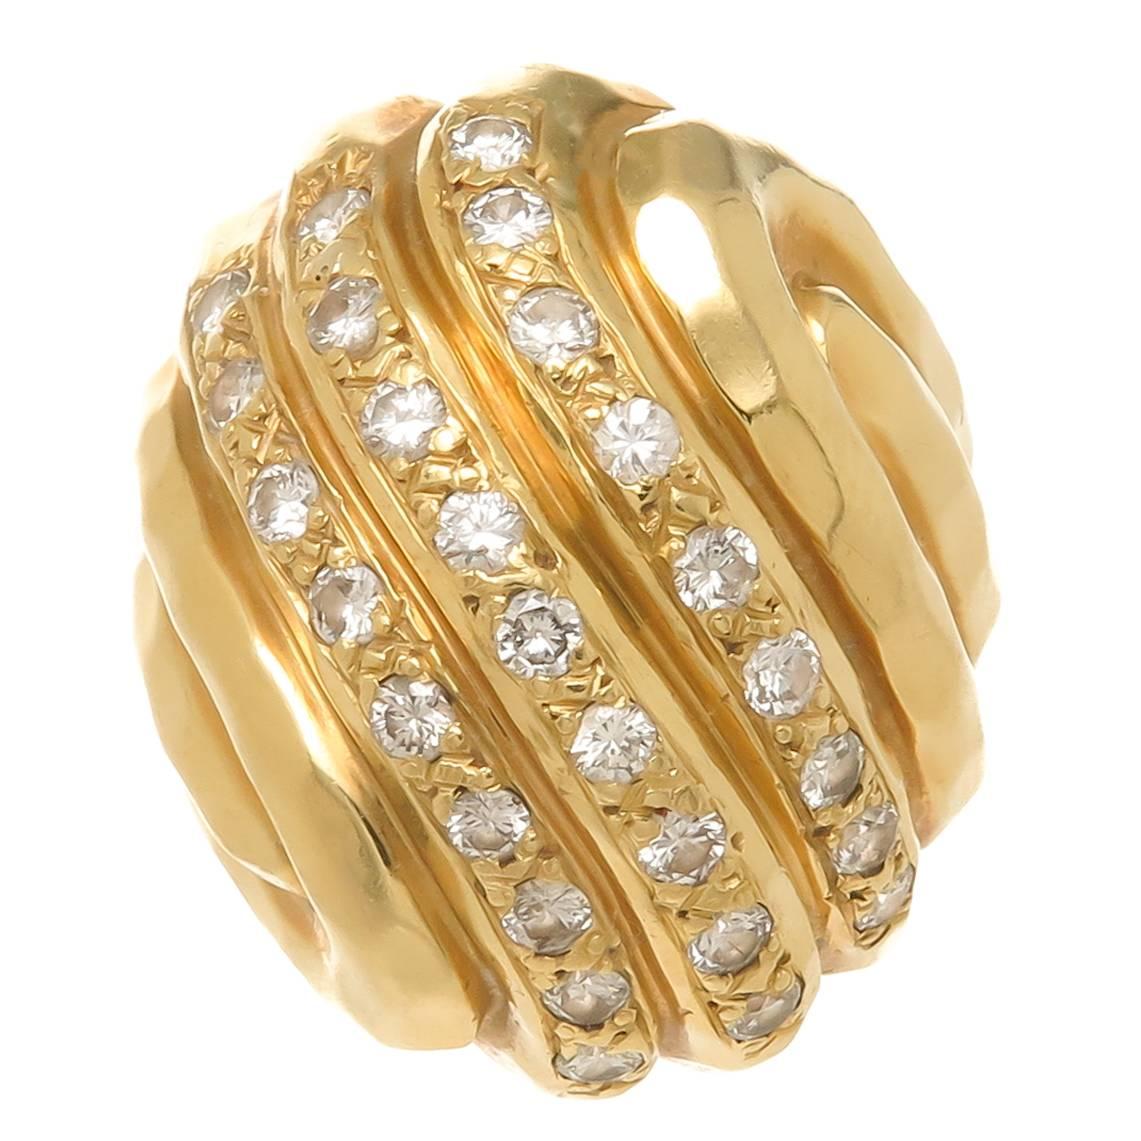 Henry Dunay Large Domed Diamond Gold Ring